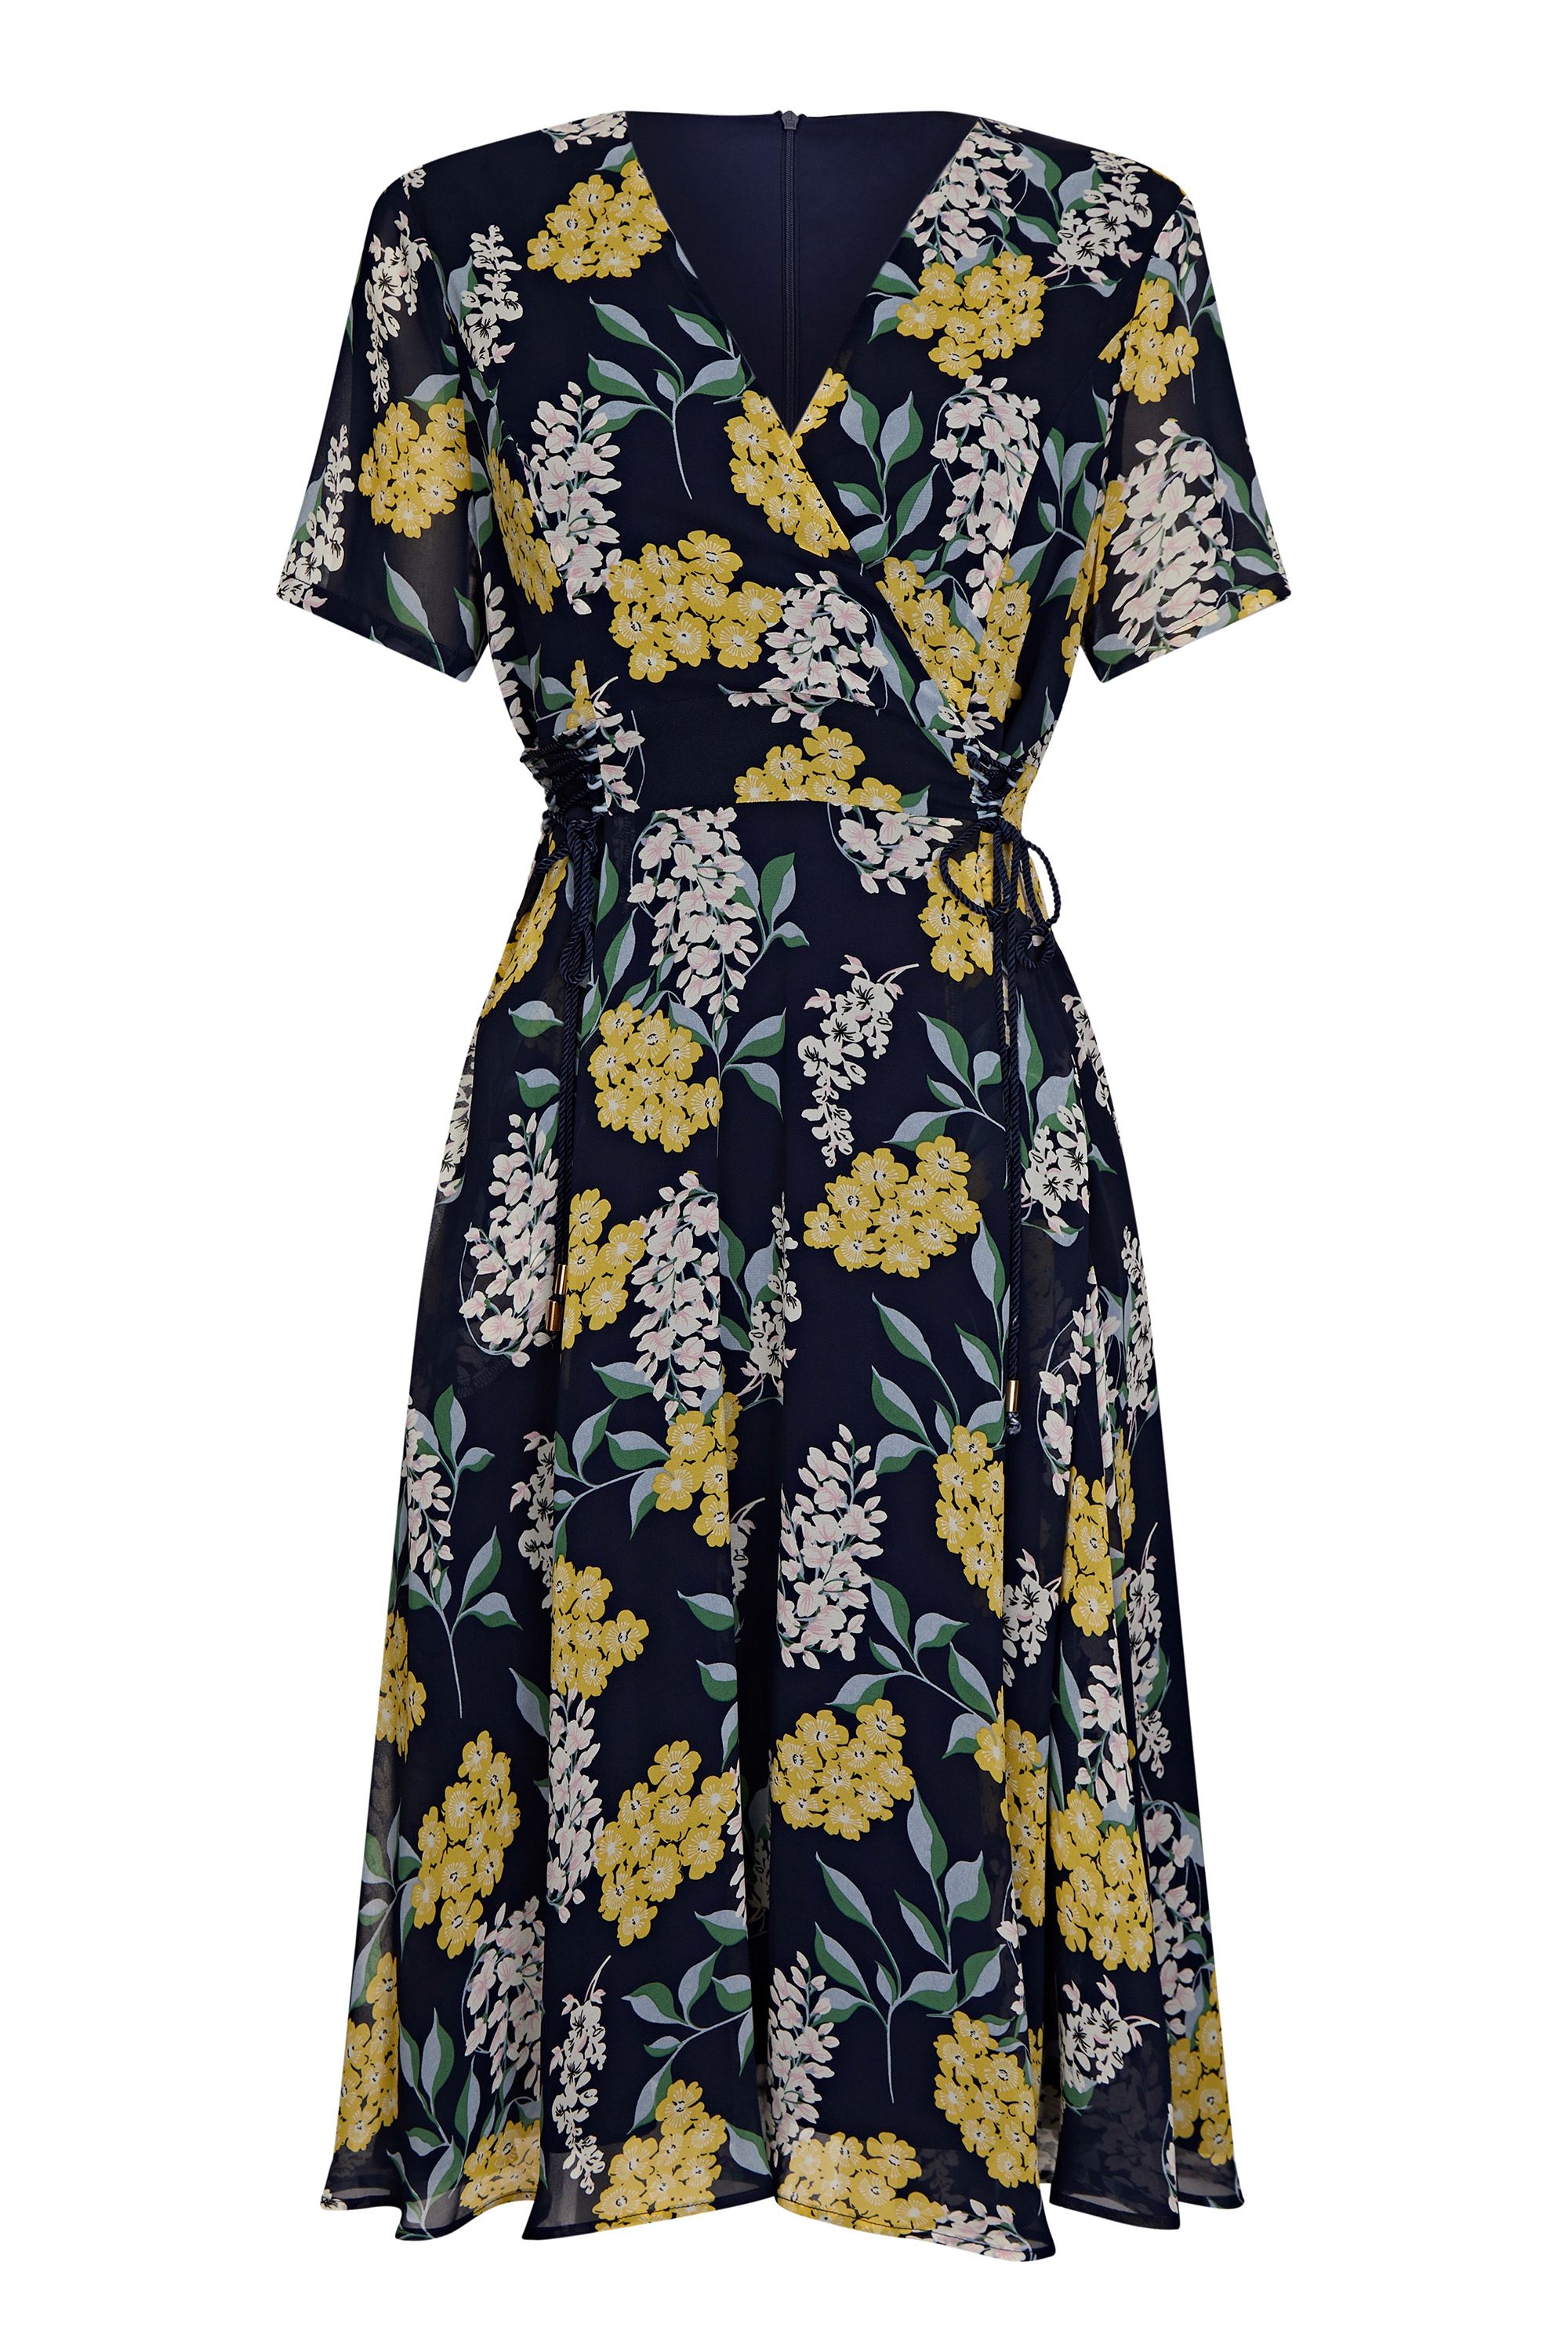 Spring Floral Dress With Tie Detail